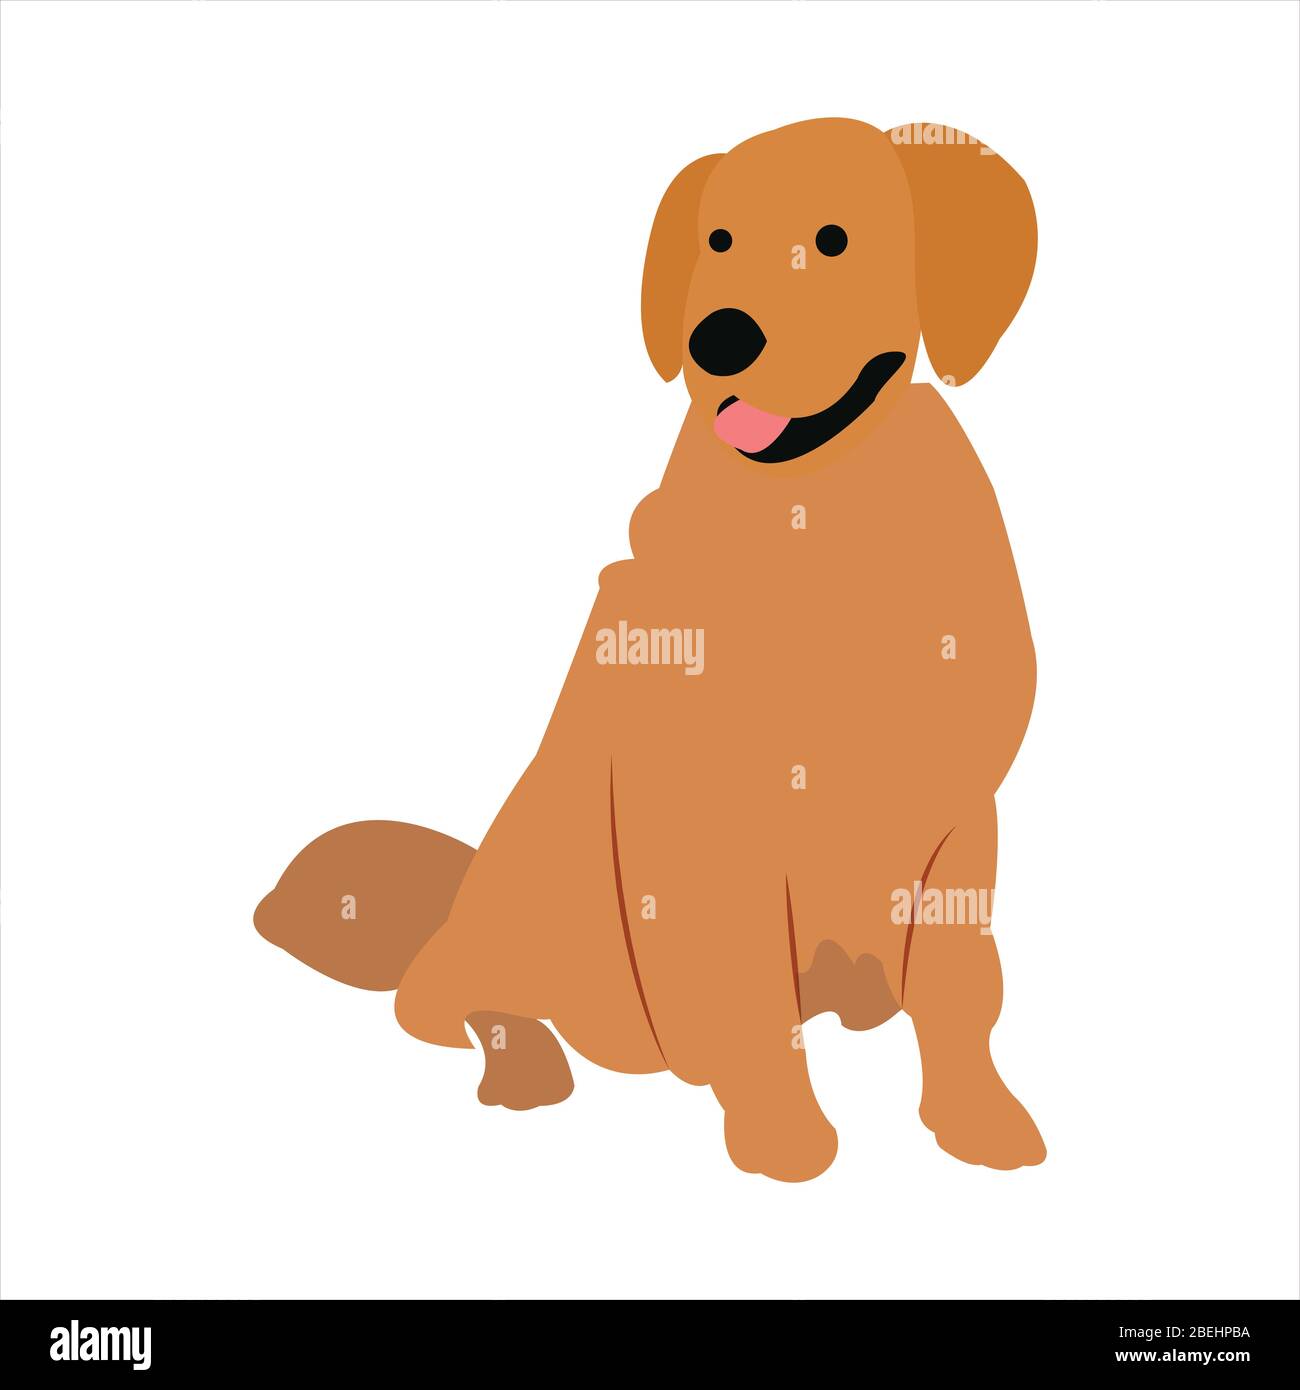 Funny dog clip art illustration with cartoon style Stock Vector